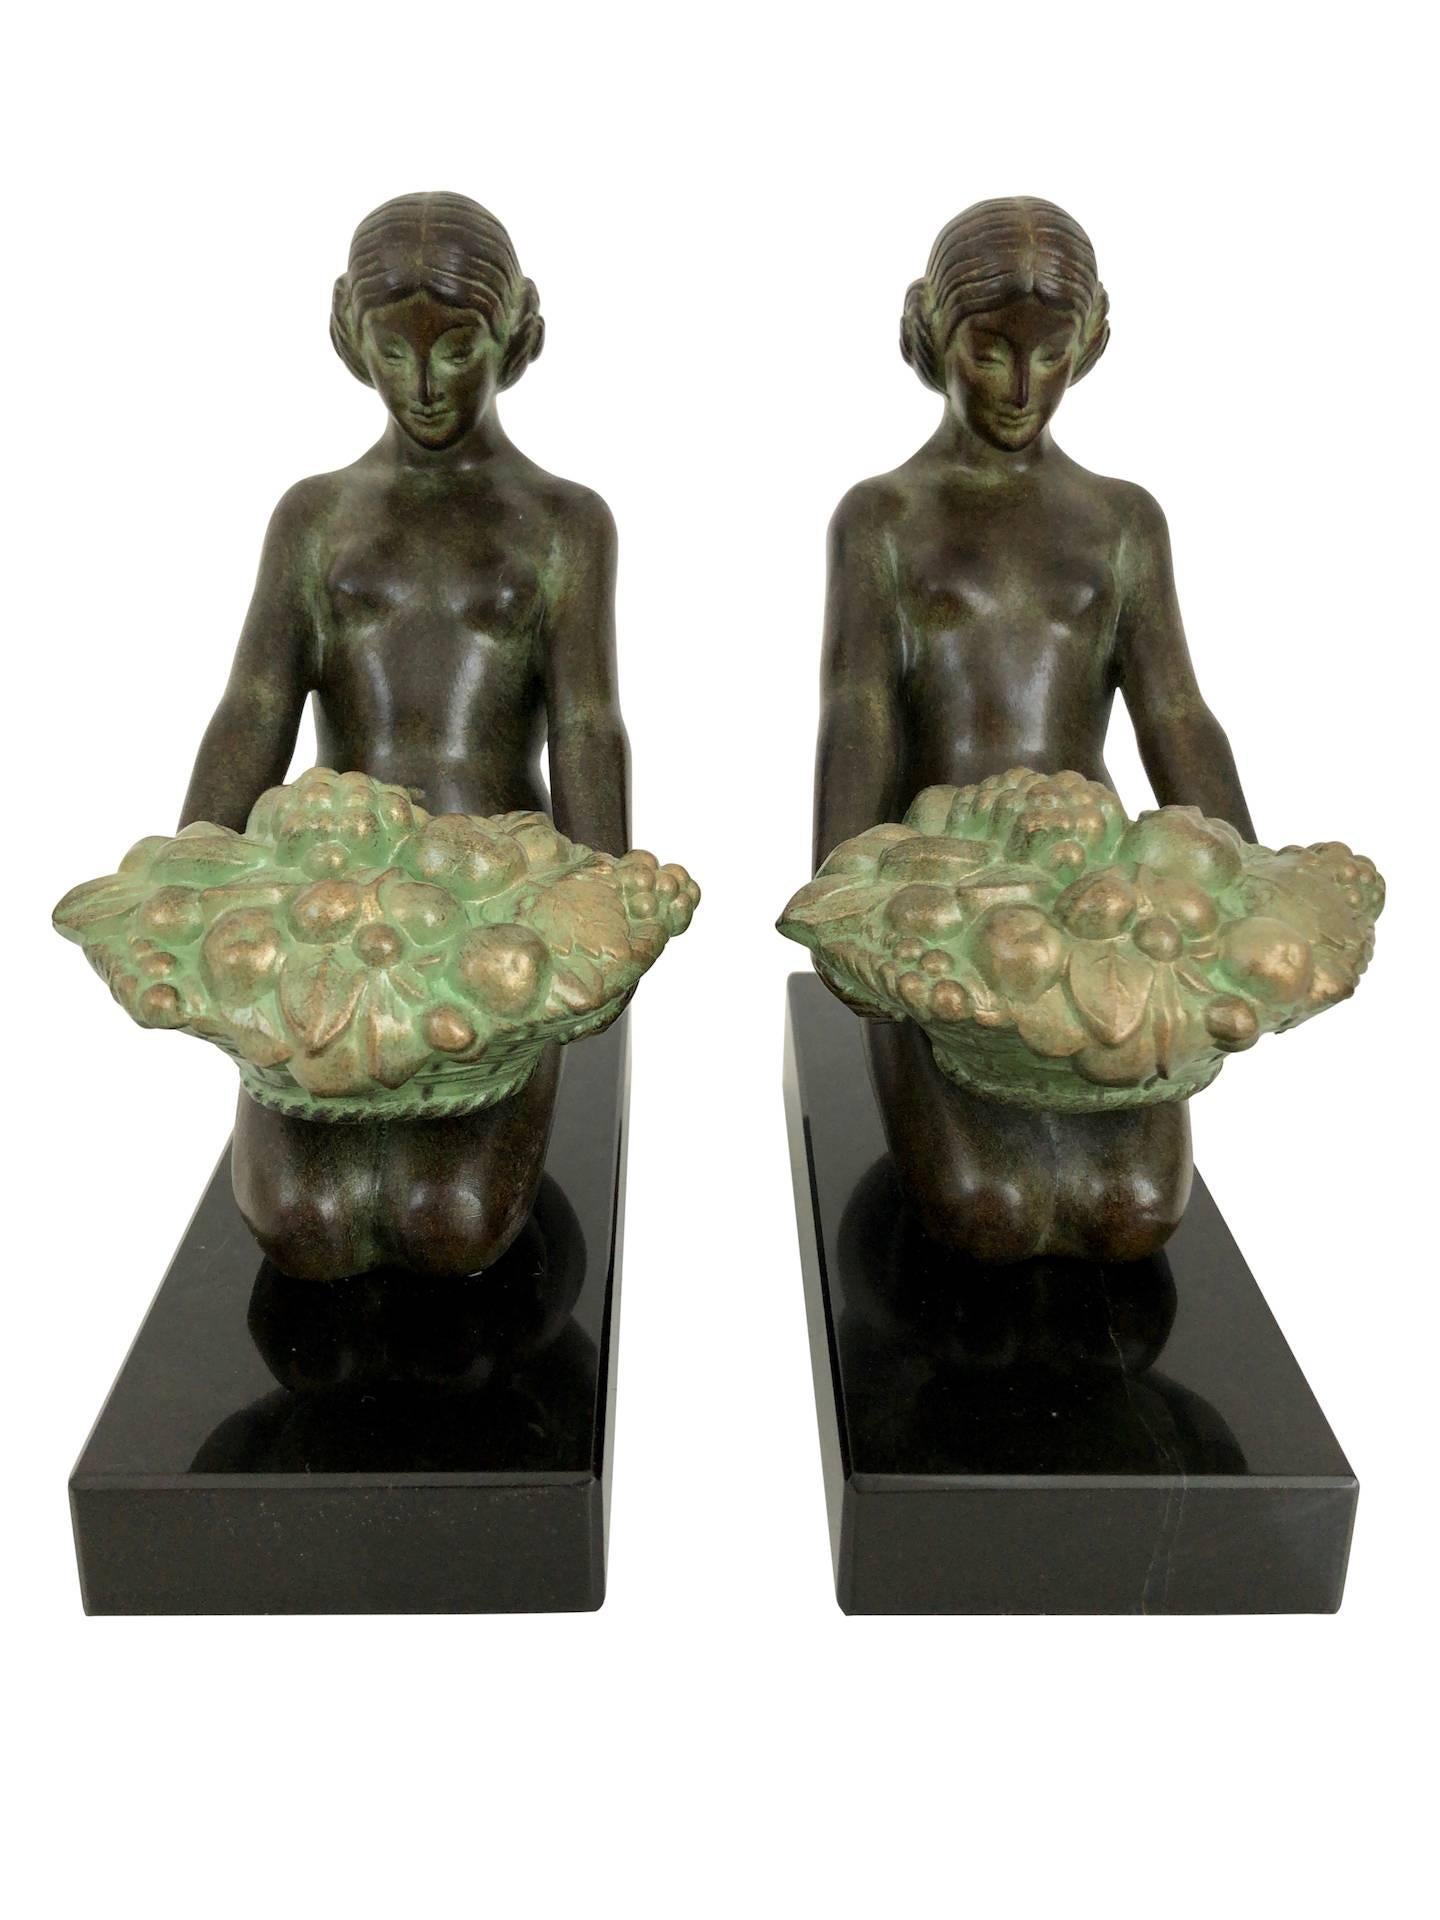 Contemporary Original Max Le Verrier Cueillette Art Deco Style Bookends in Spelter and Marble